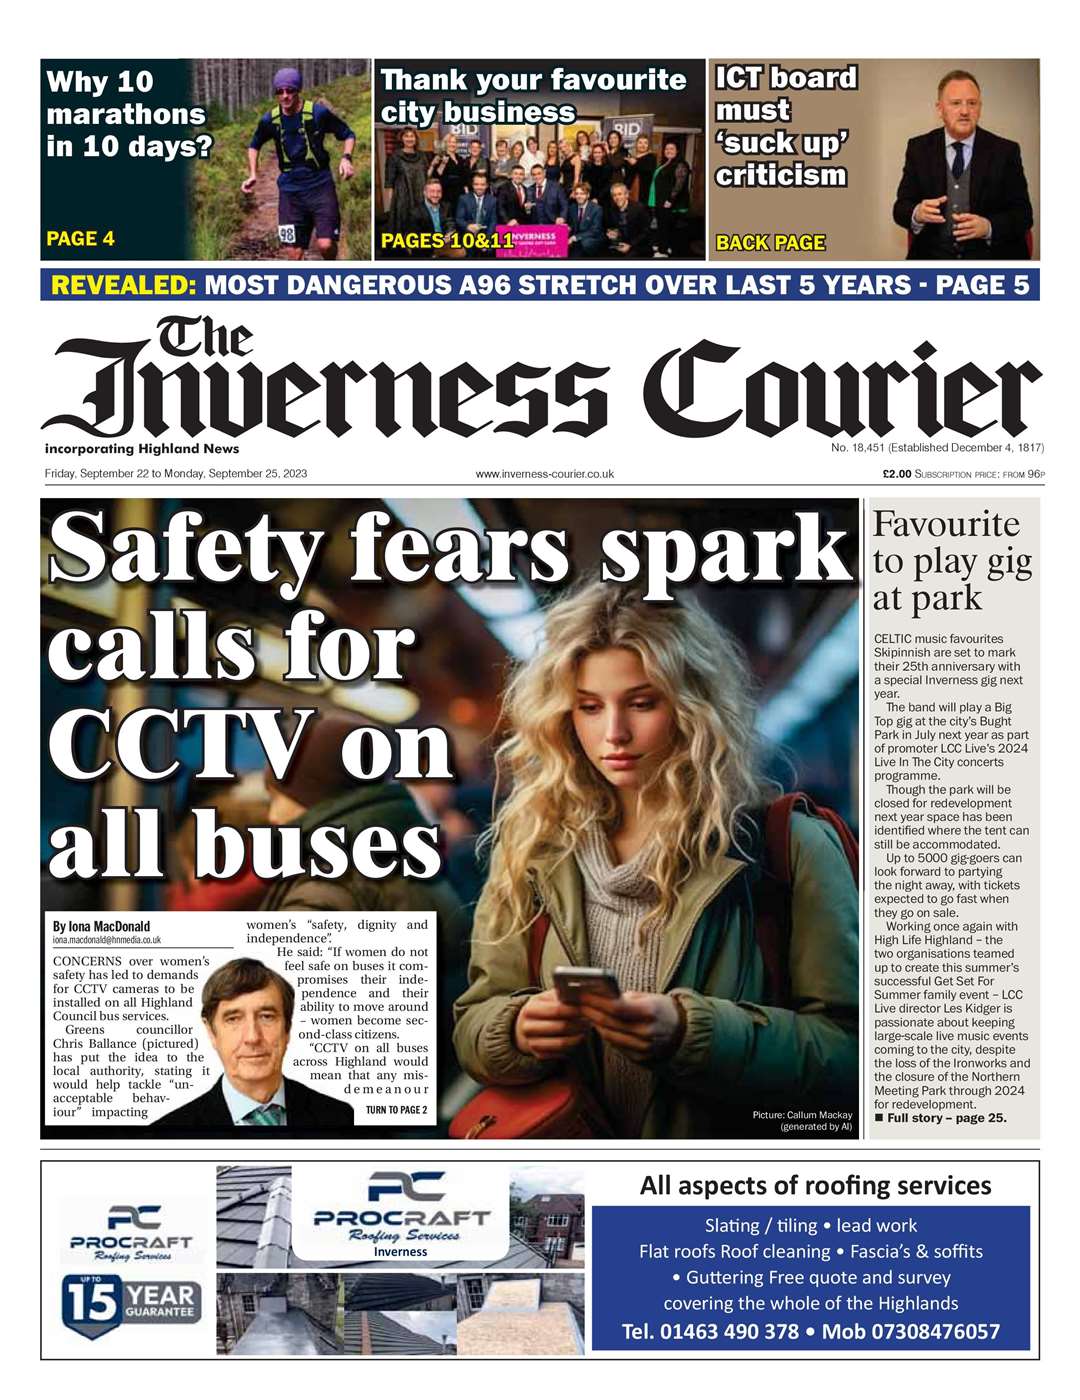 The Inverness Courier, September 22, front page.